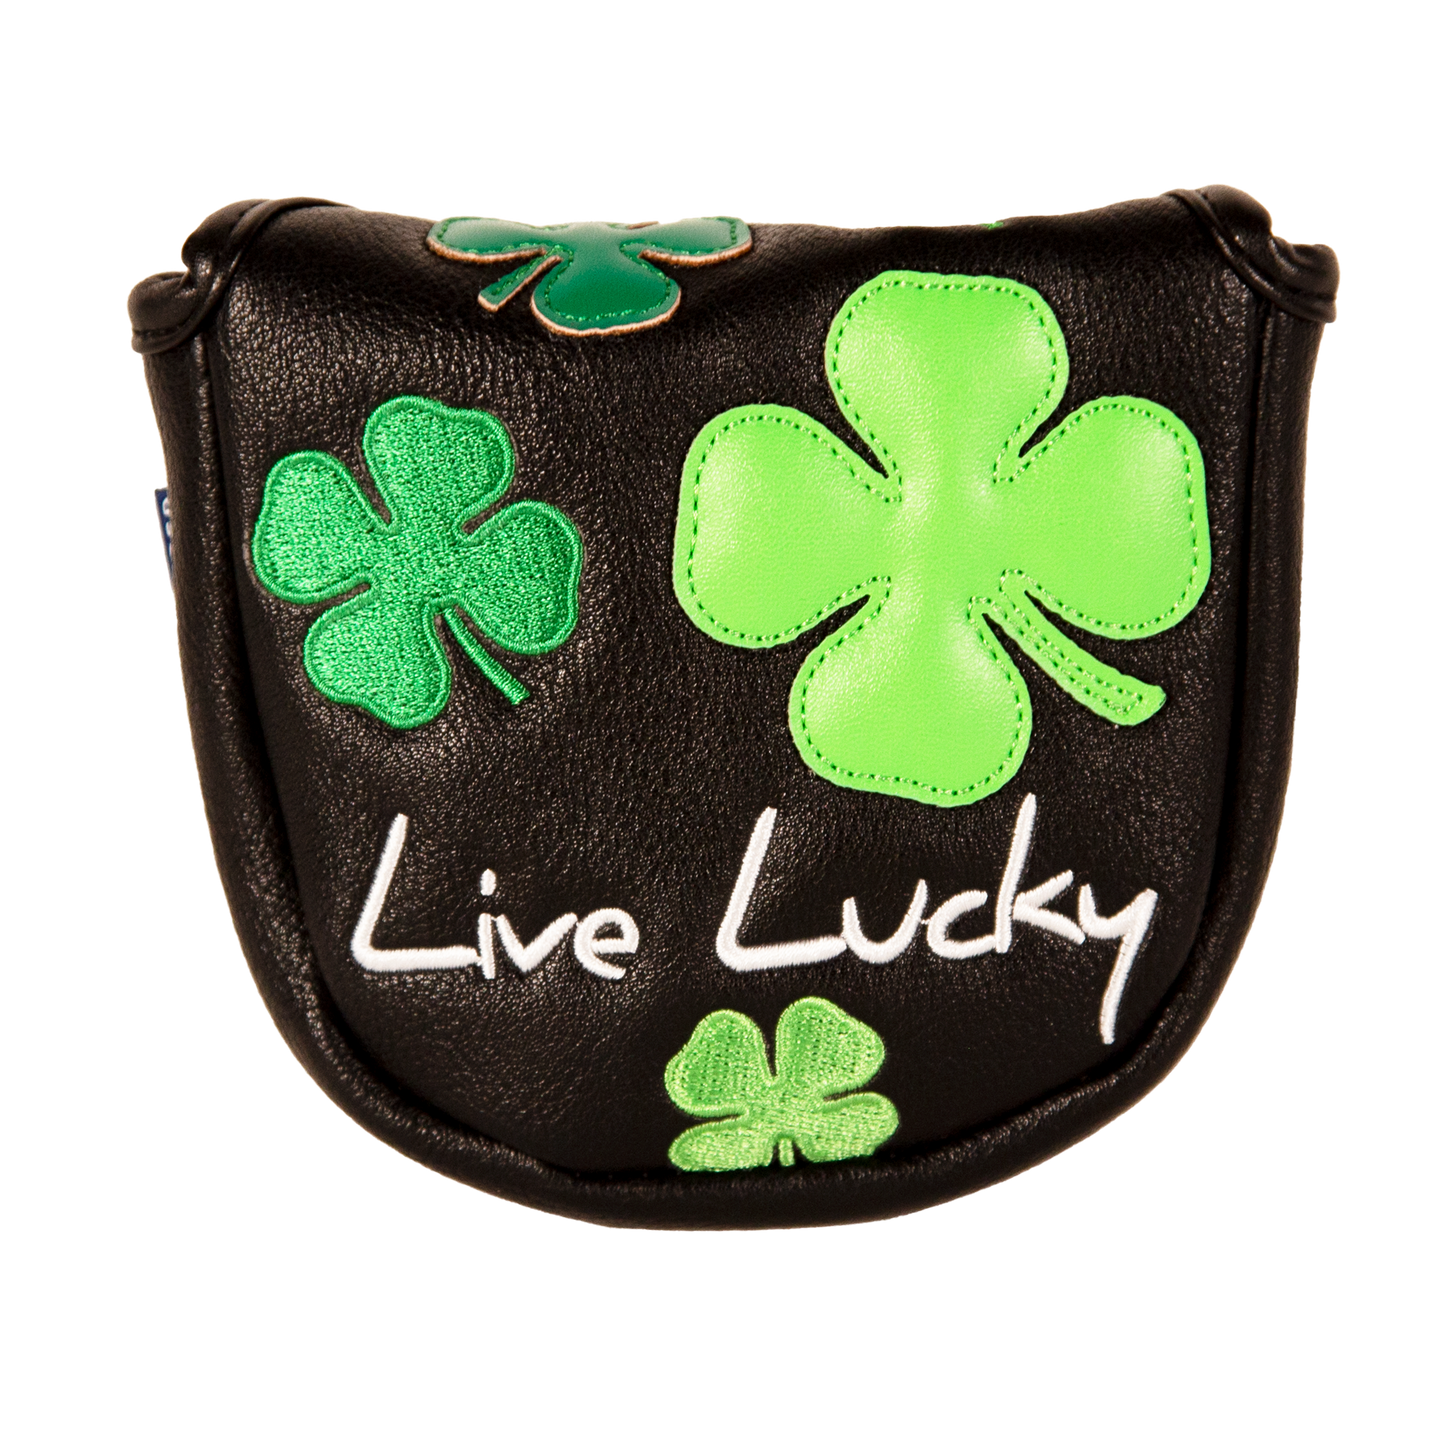 Live Lucky "Emerald" Mallet Putter Cover